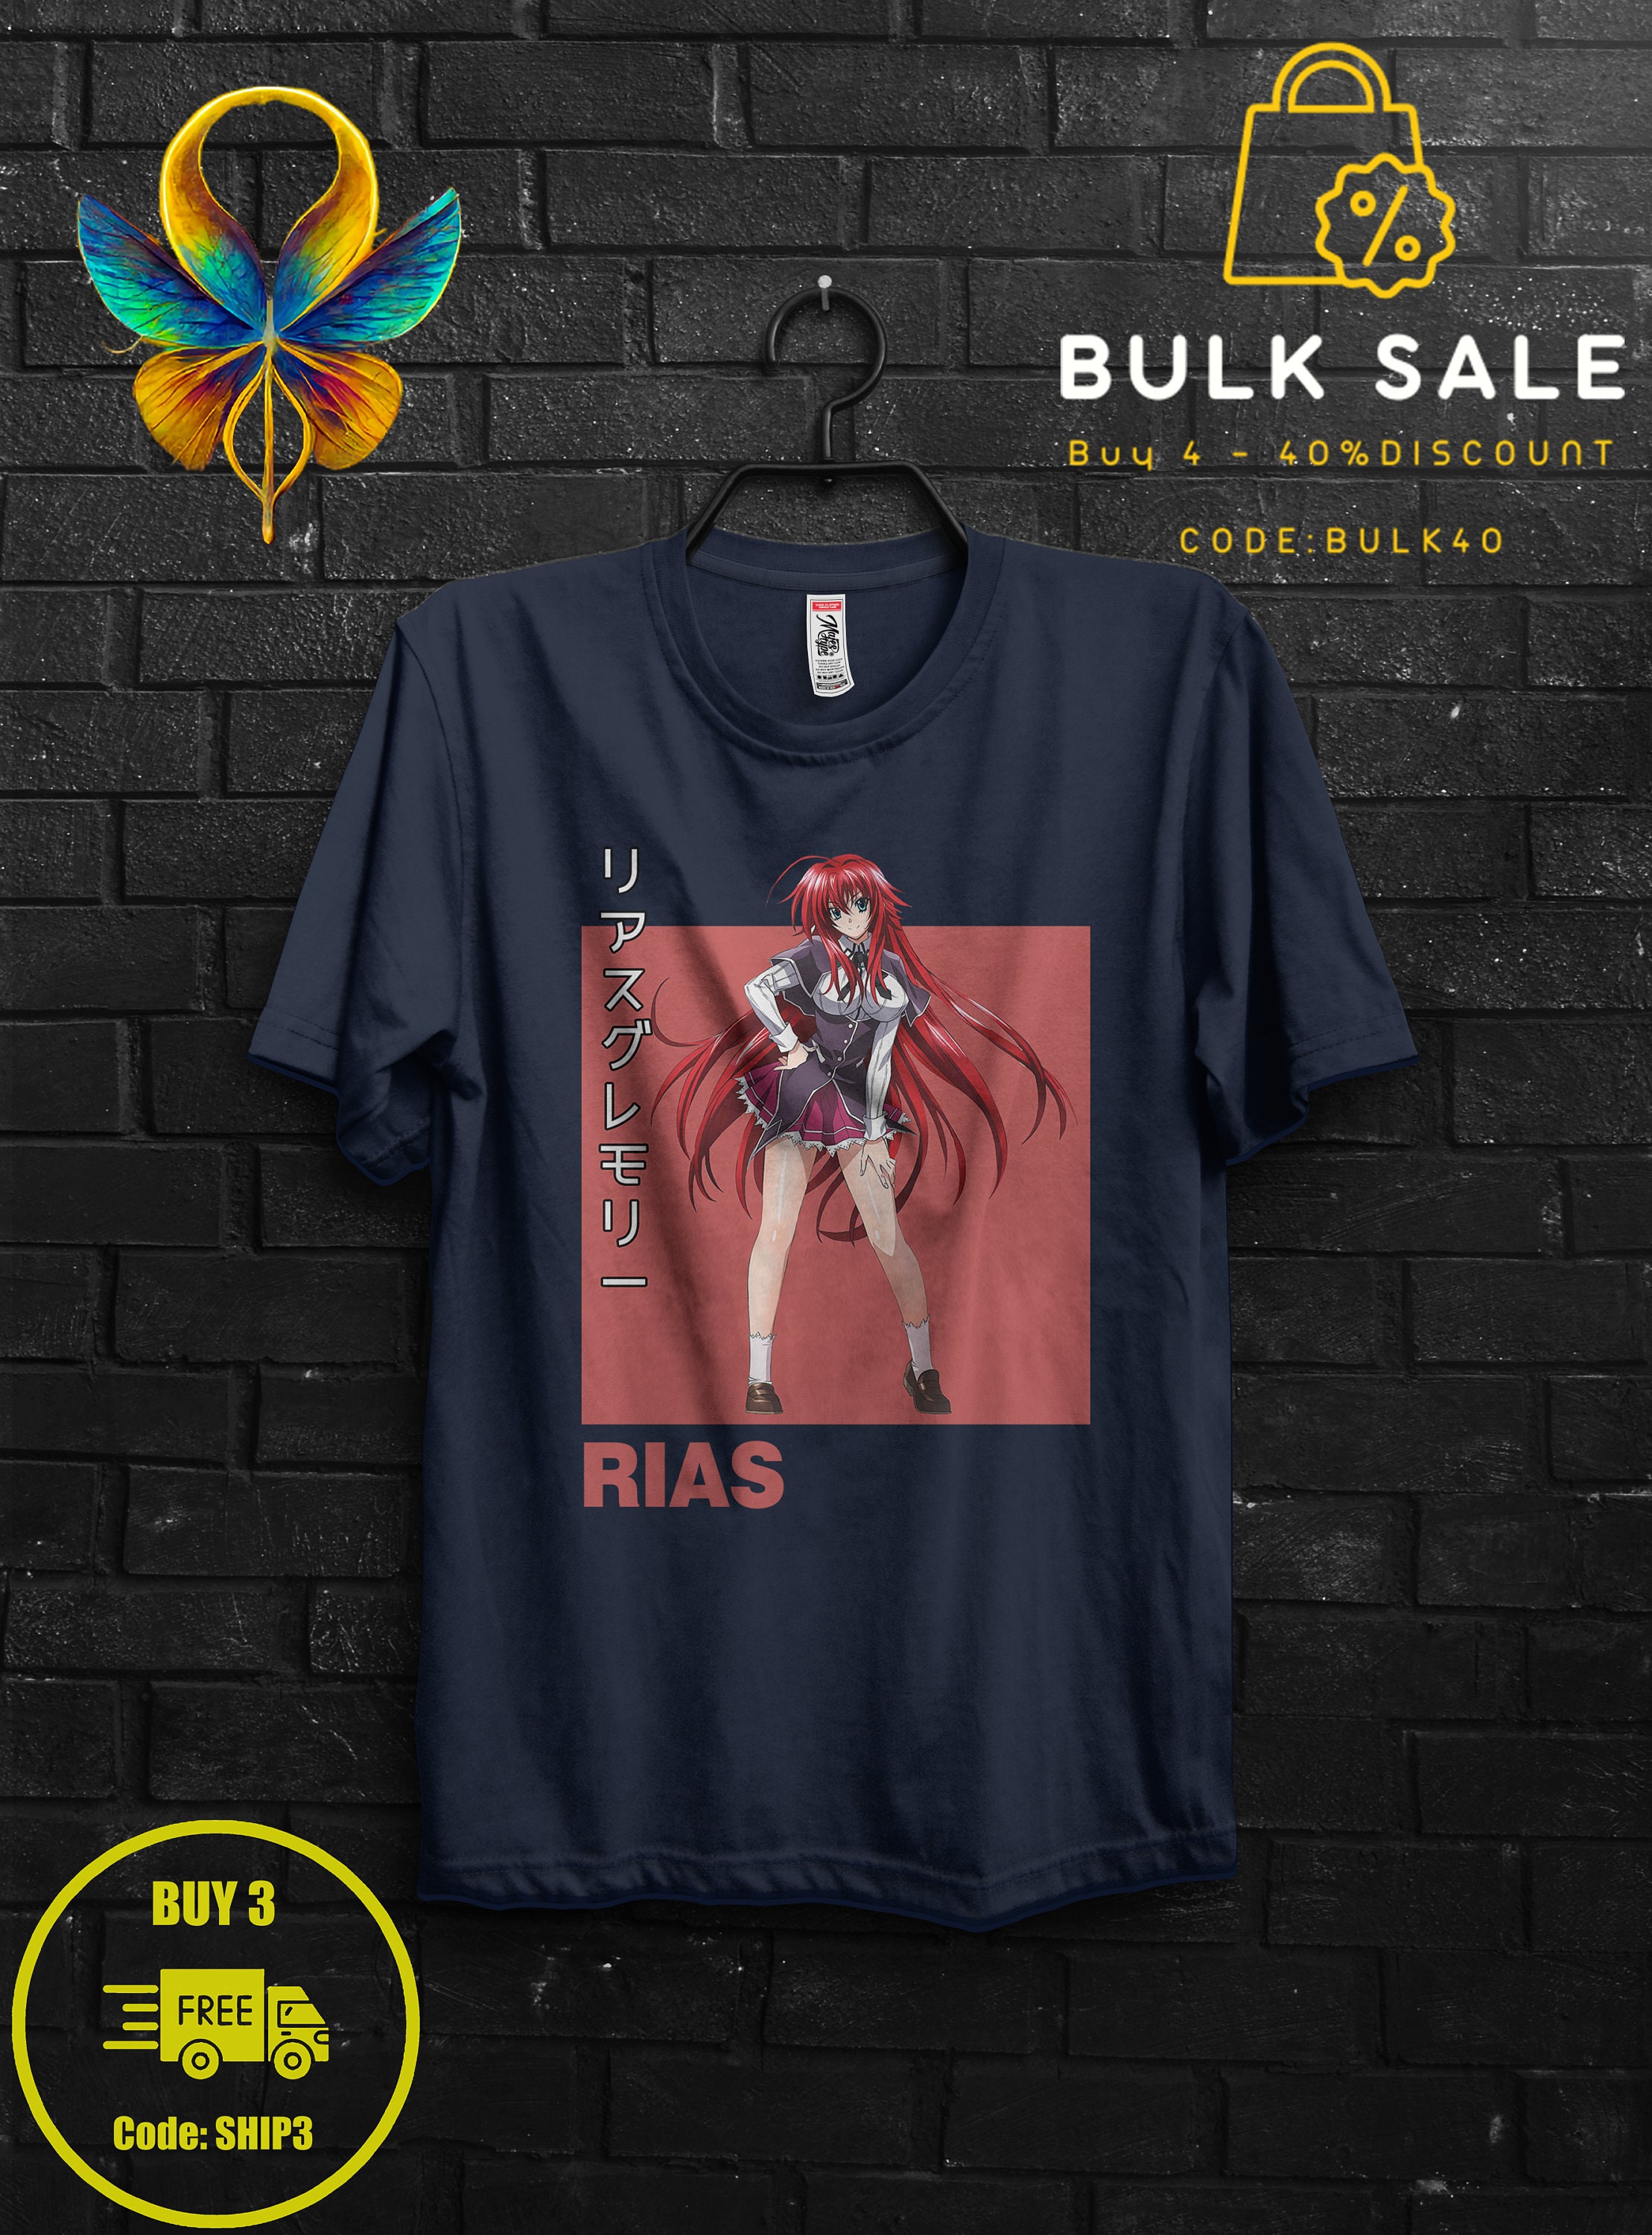 Rias Gremory Shirt Anime Gift Cosplay For Girl,Rossweisse Tshirt For Sitri,Issei Hyoudou Sweat,Xenovia Appareal For Her,High School DxD Tee 1600246565